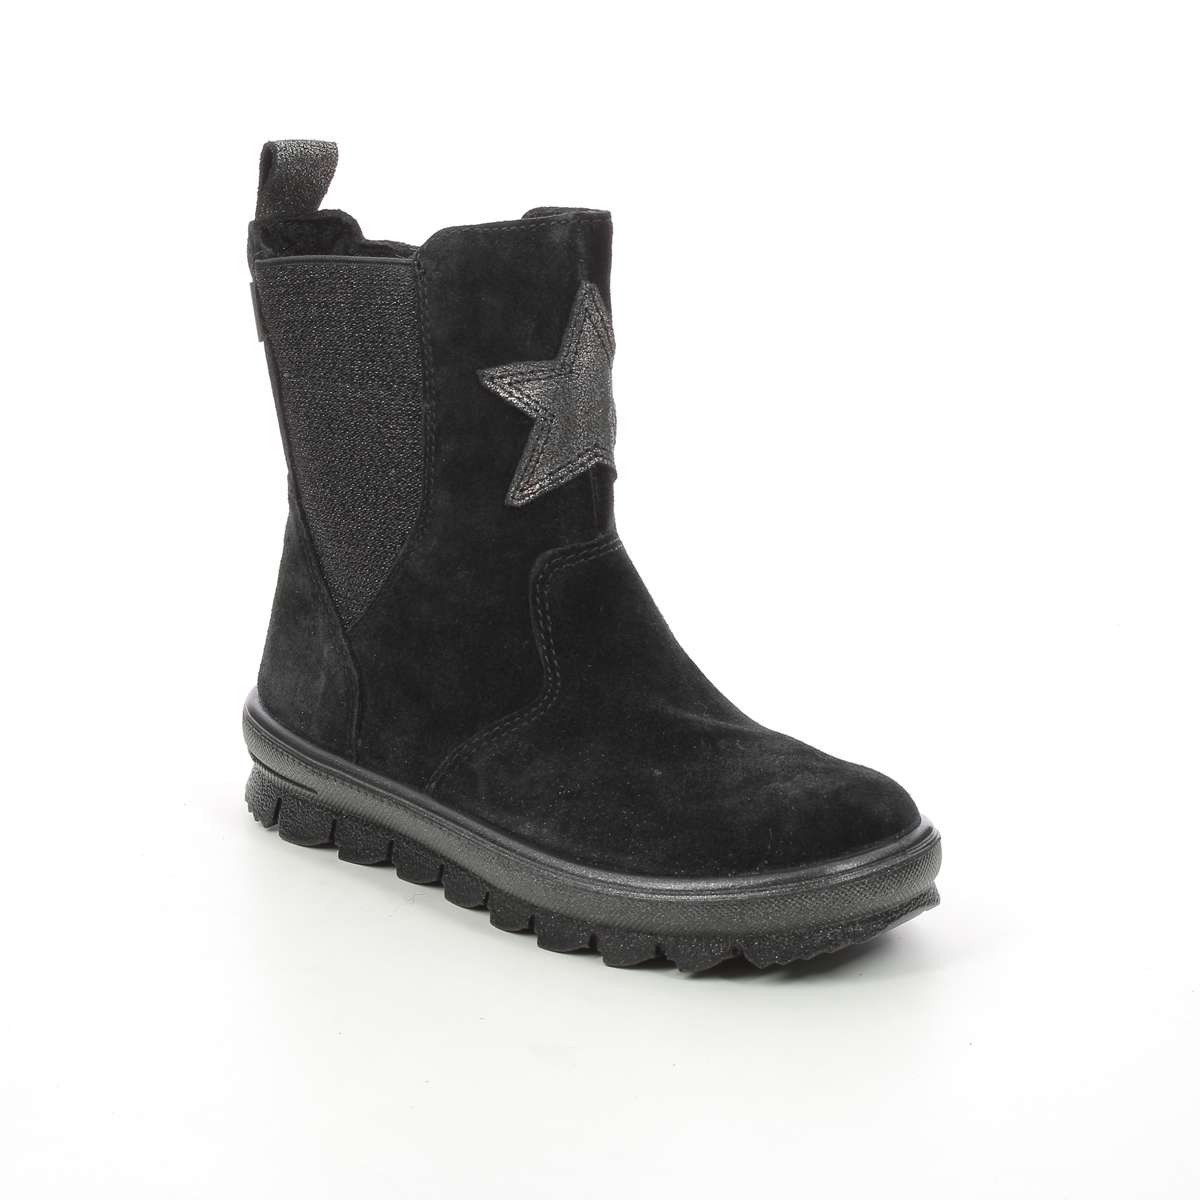 Superfit Flavia Star Gtx Black Suede Kids Girls Boots 1000217-0000 In Size 28 In Plain Black Suede For kids